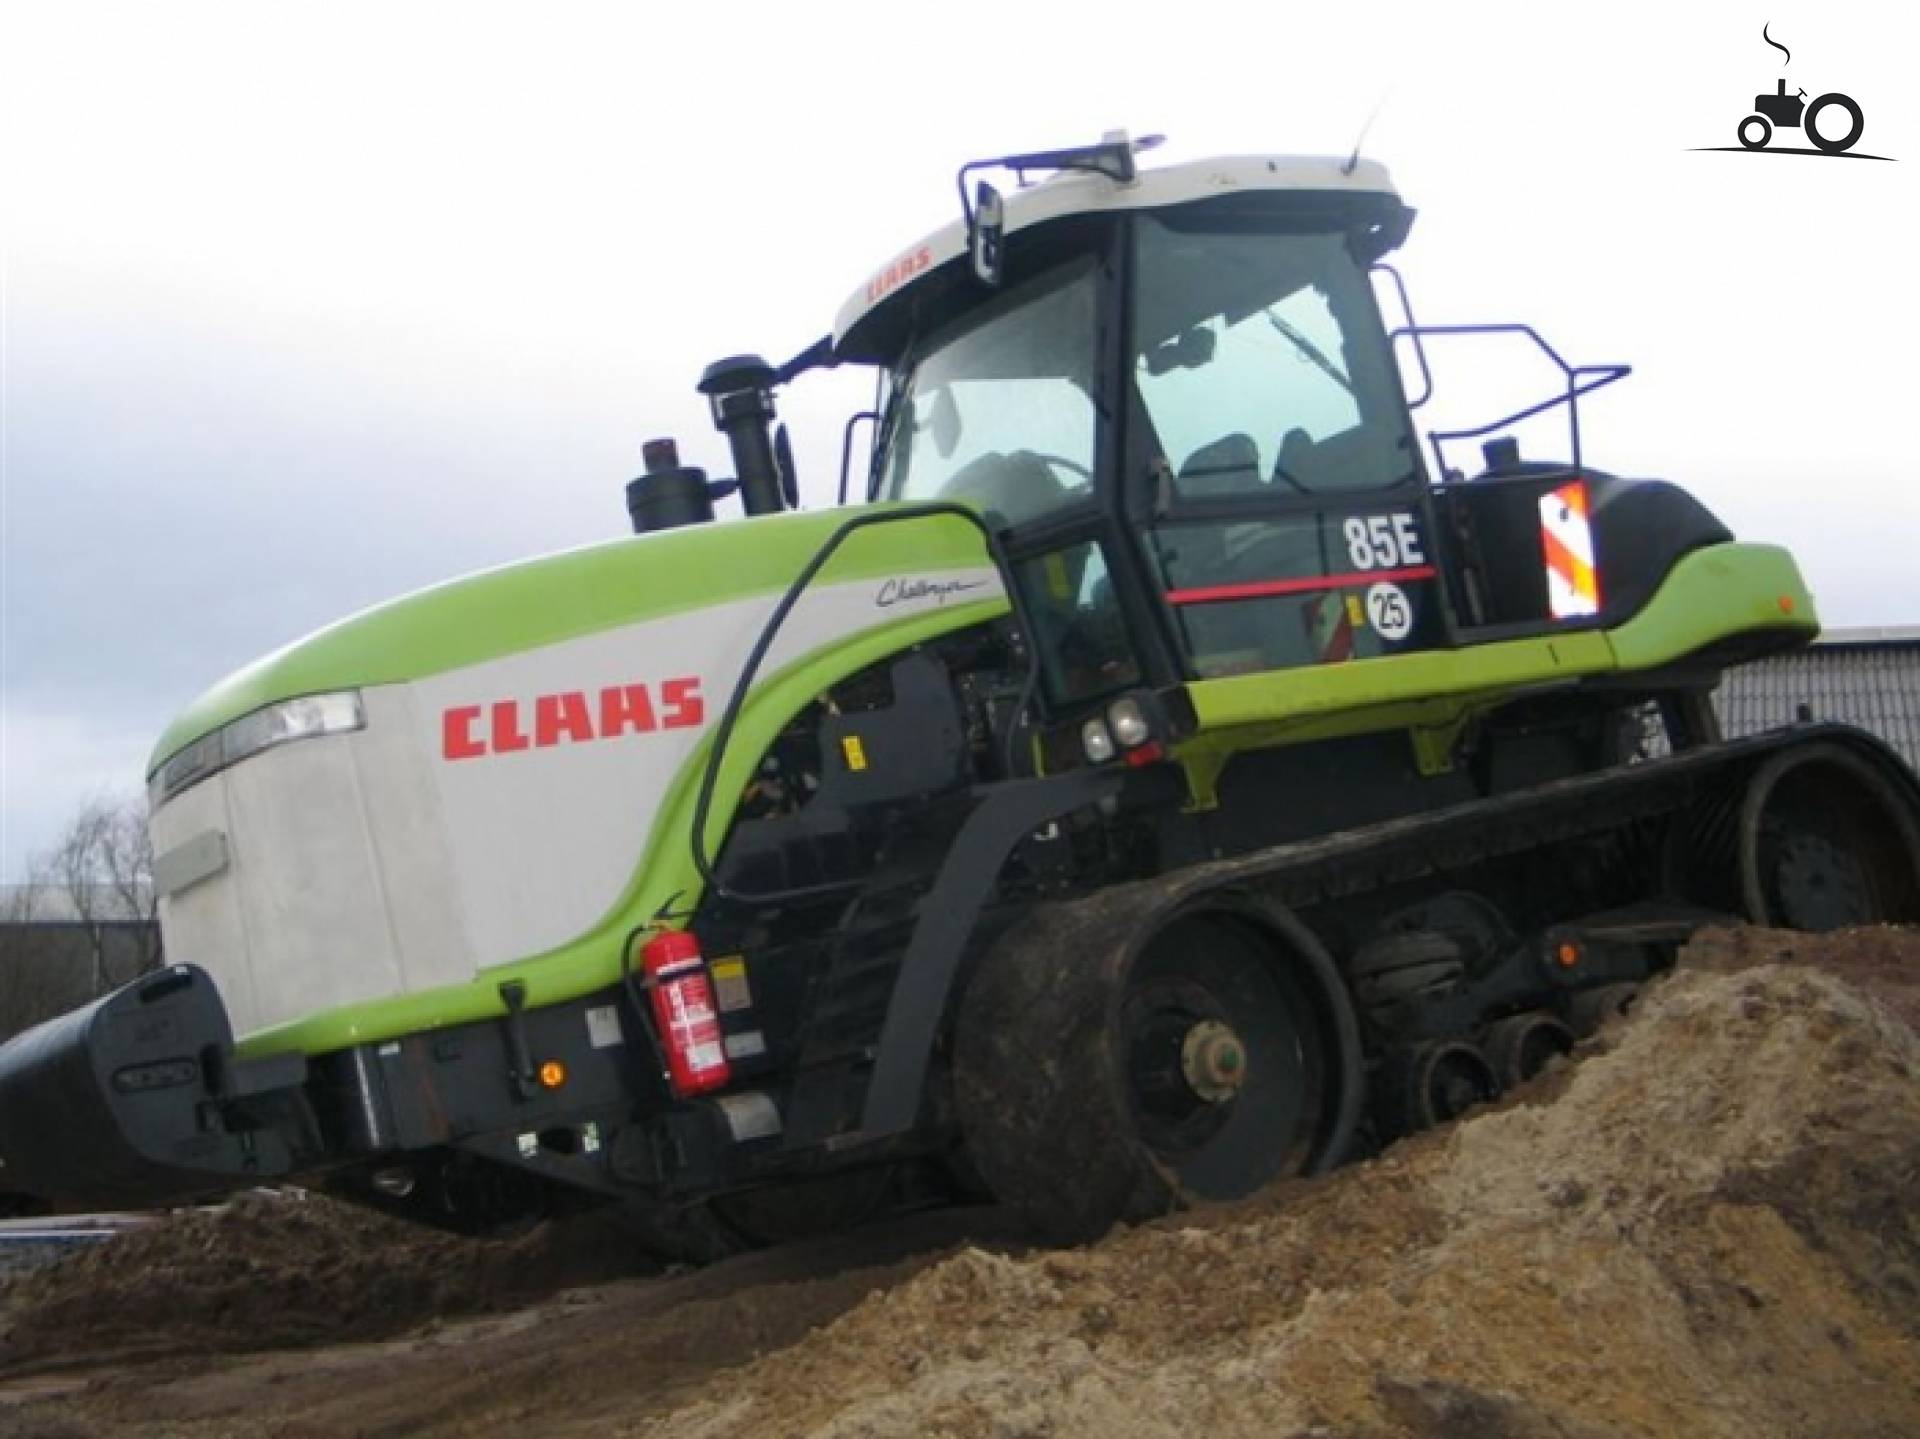 Claas Challenger 85E | Picture made by klontje